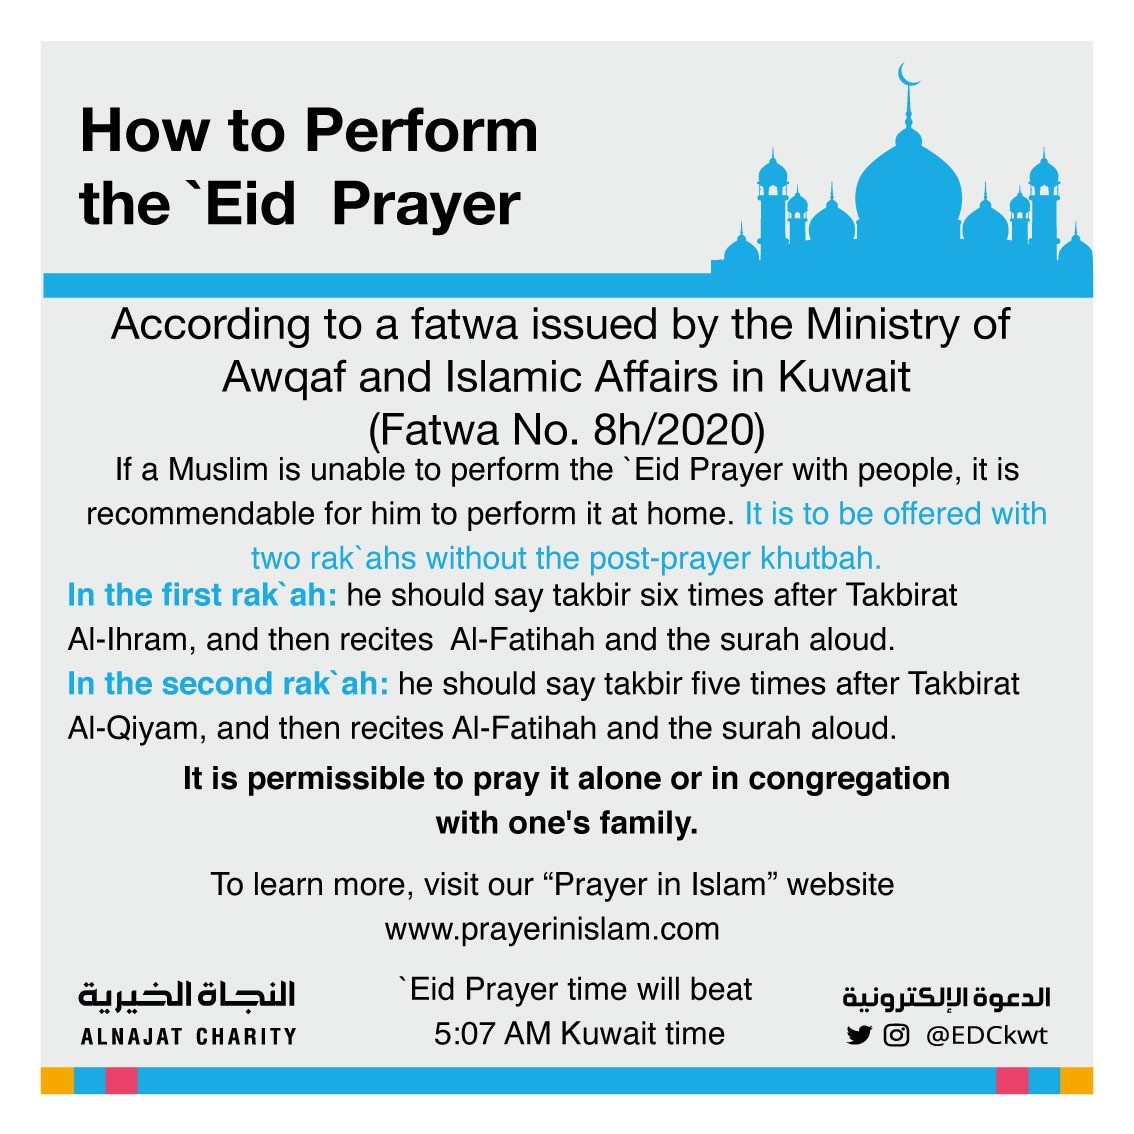 How to Pray Eid AlFitr at Home during the Lockdown? My Islam Guide